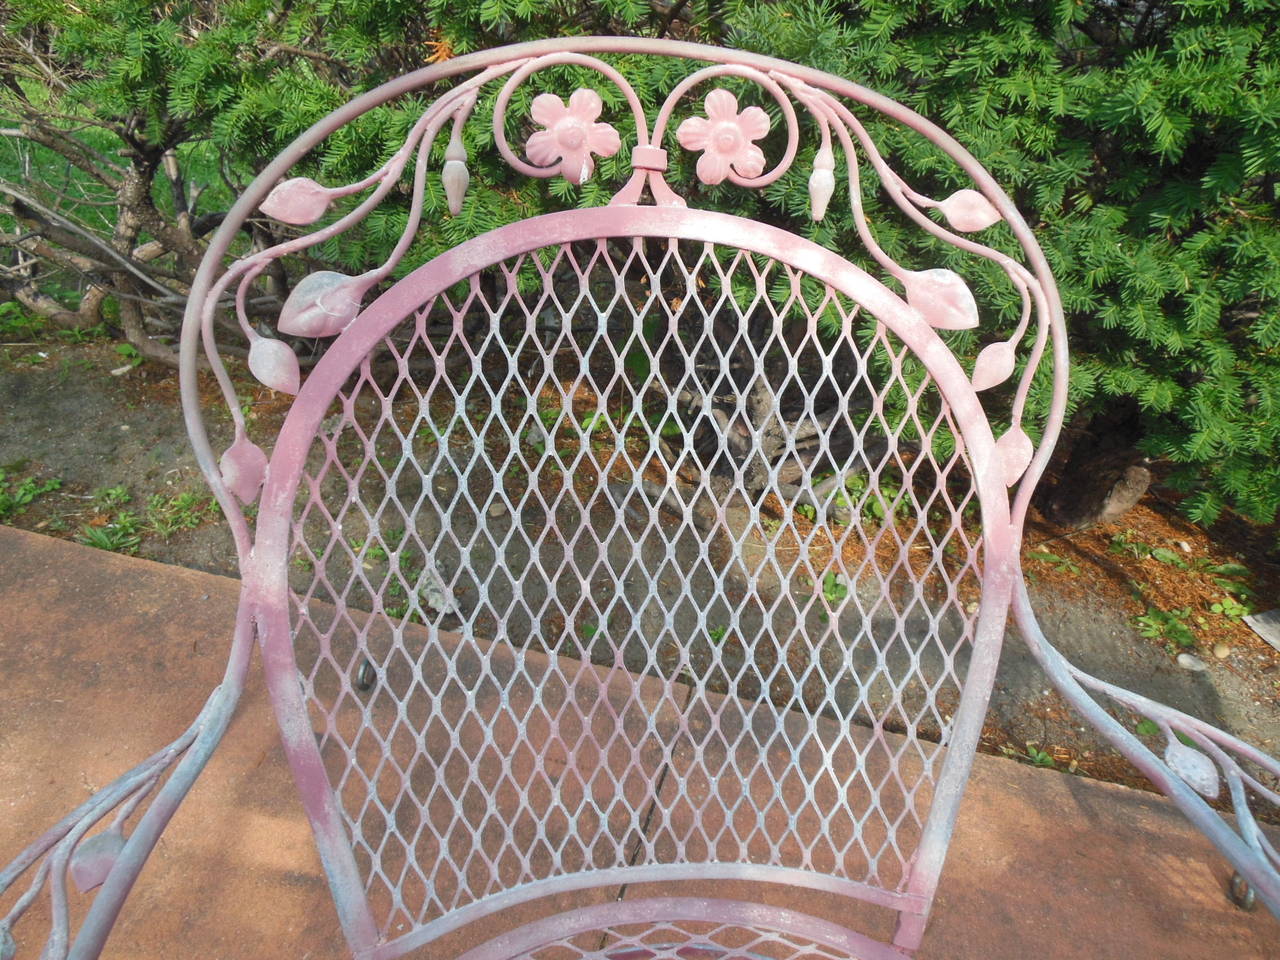 An unusual pair of vintage Salterini wrought iron chairs. The chairs are distinctive in size and style. They do retain some of their original pink paint. Salterini made pieces in several different colors and these are interesting because of their